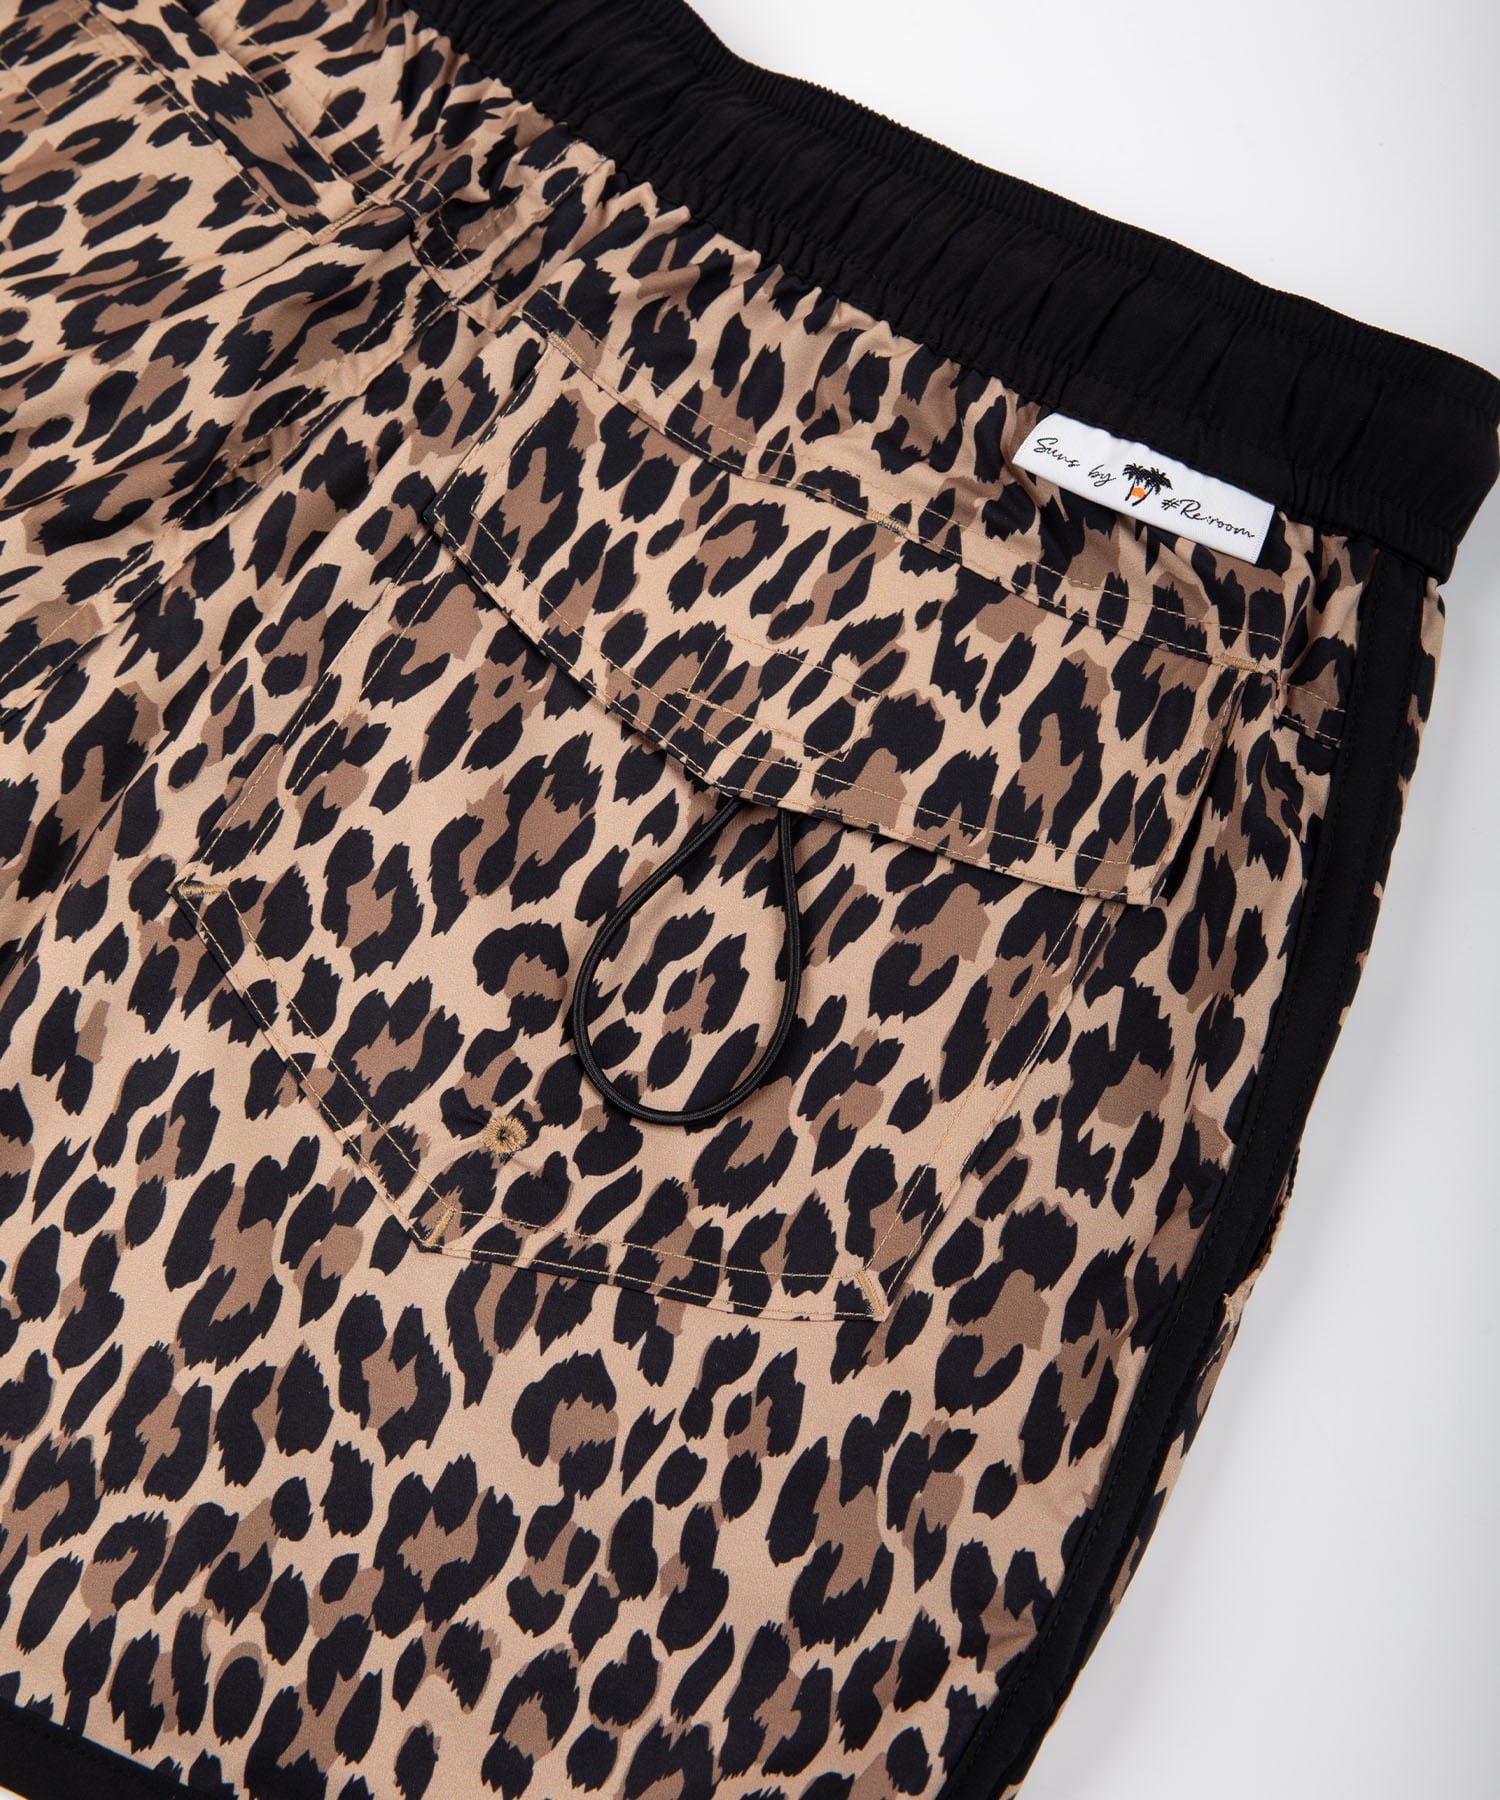 SUNS】LEOPARD PIPING BOARDSHORTS［RSW071］ | #Re:room（リルーム）